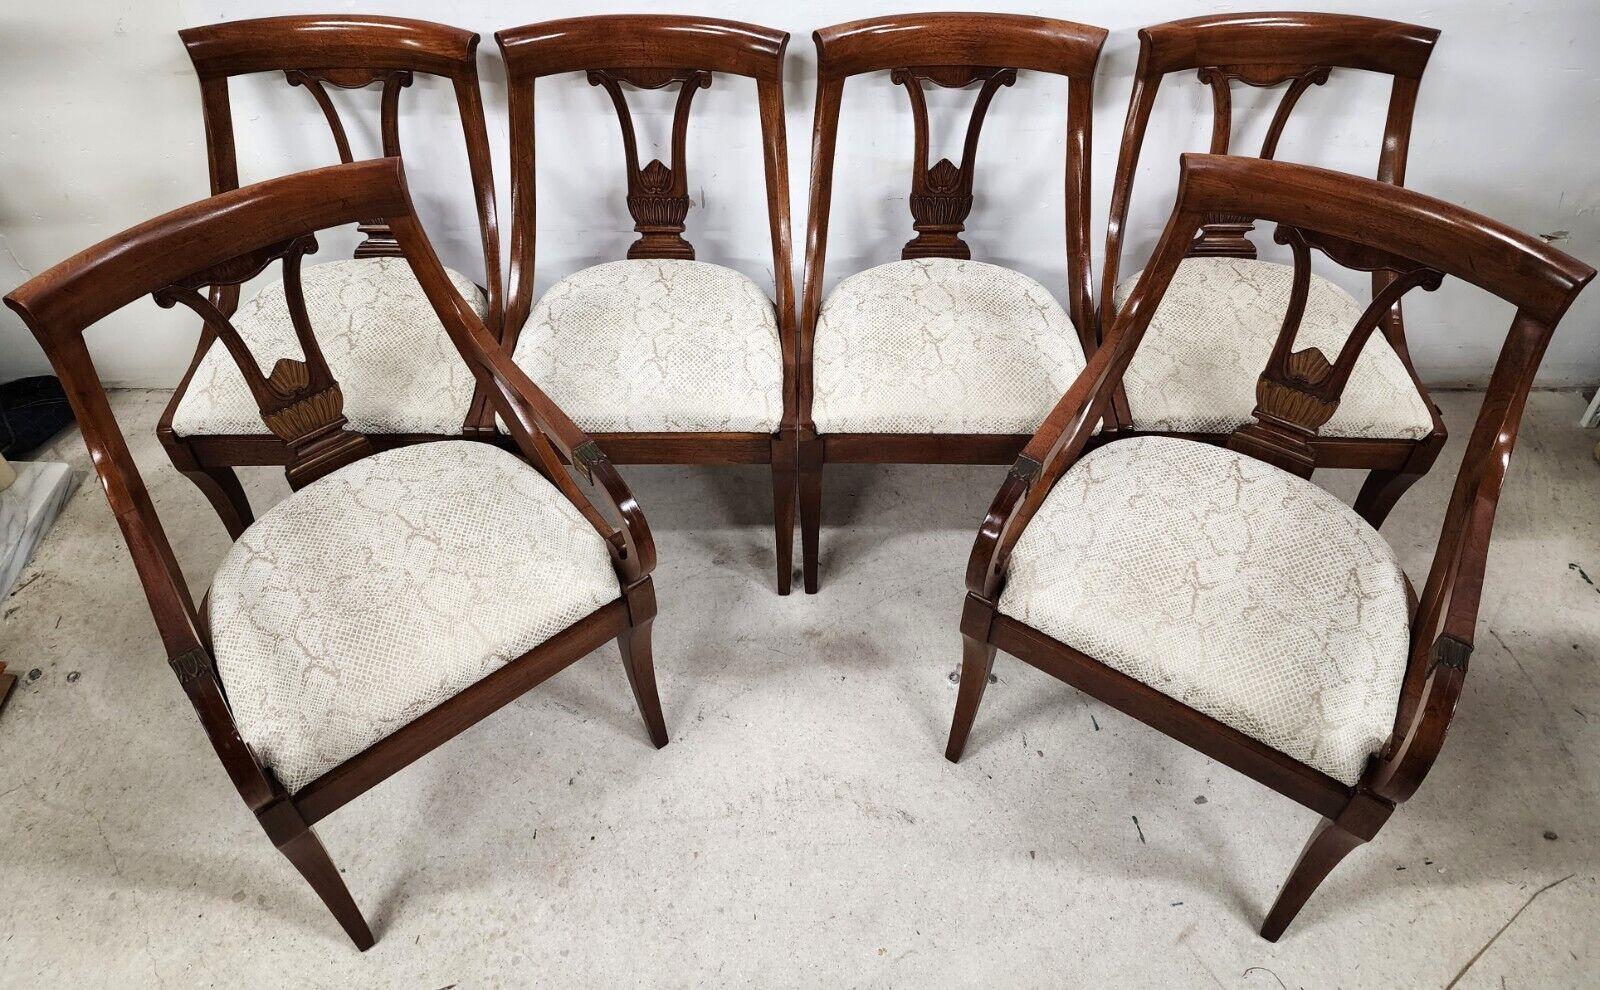 For FULL item description click on CONTINUE READING at the bottom of this page.

Offering one of our recent palm beach estate fine furniture acquisitions of a
set of 6 mid-century 1950's regency style dining chairs in solid walnut by John